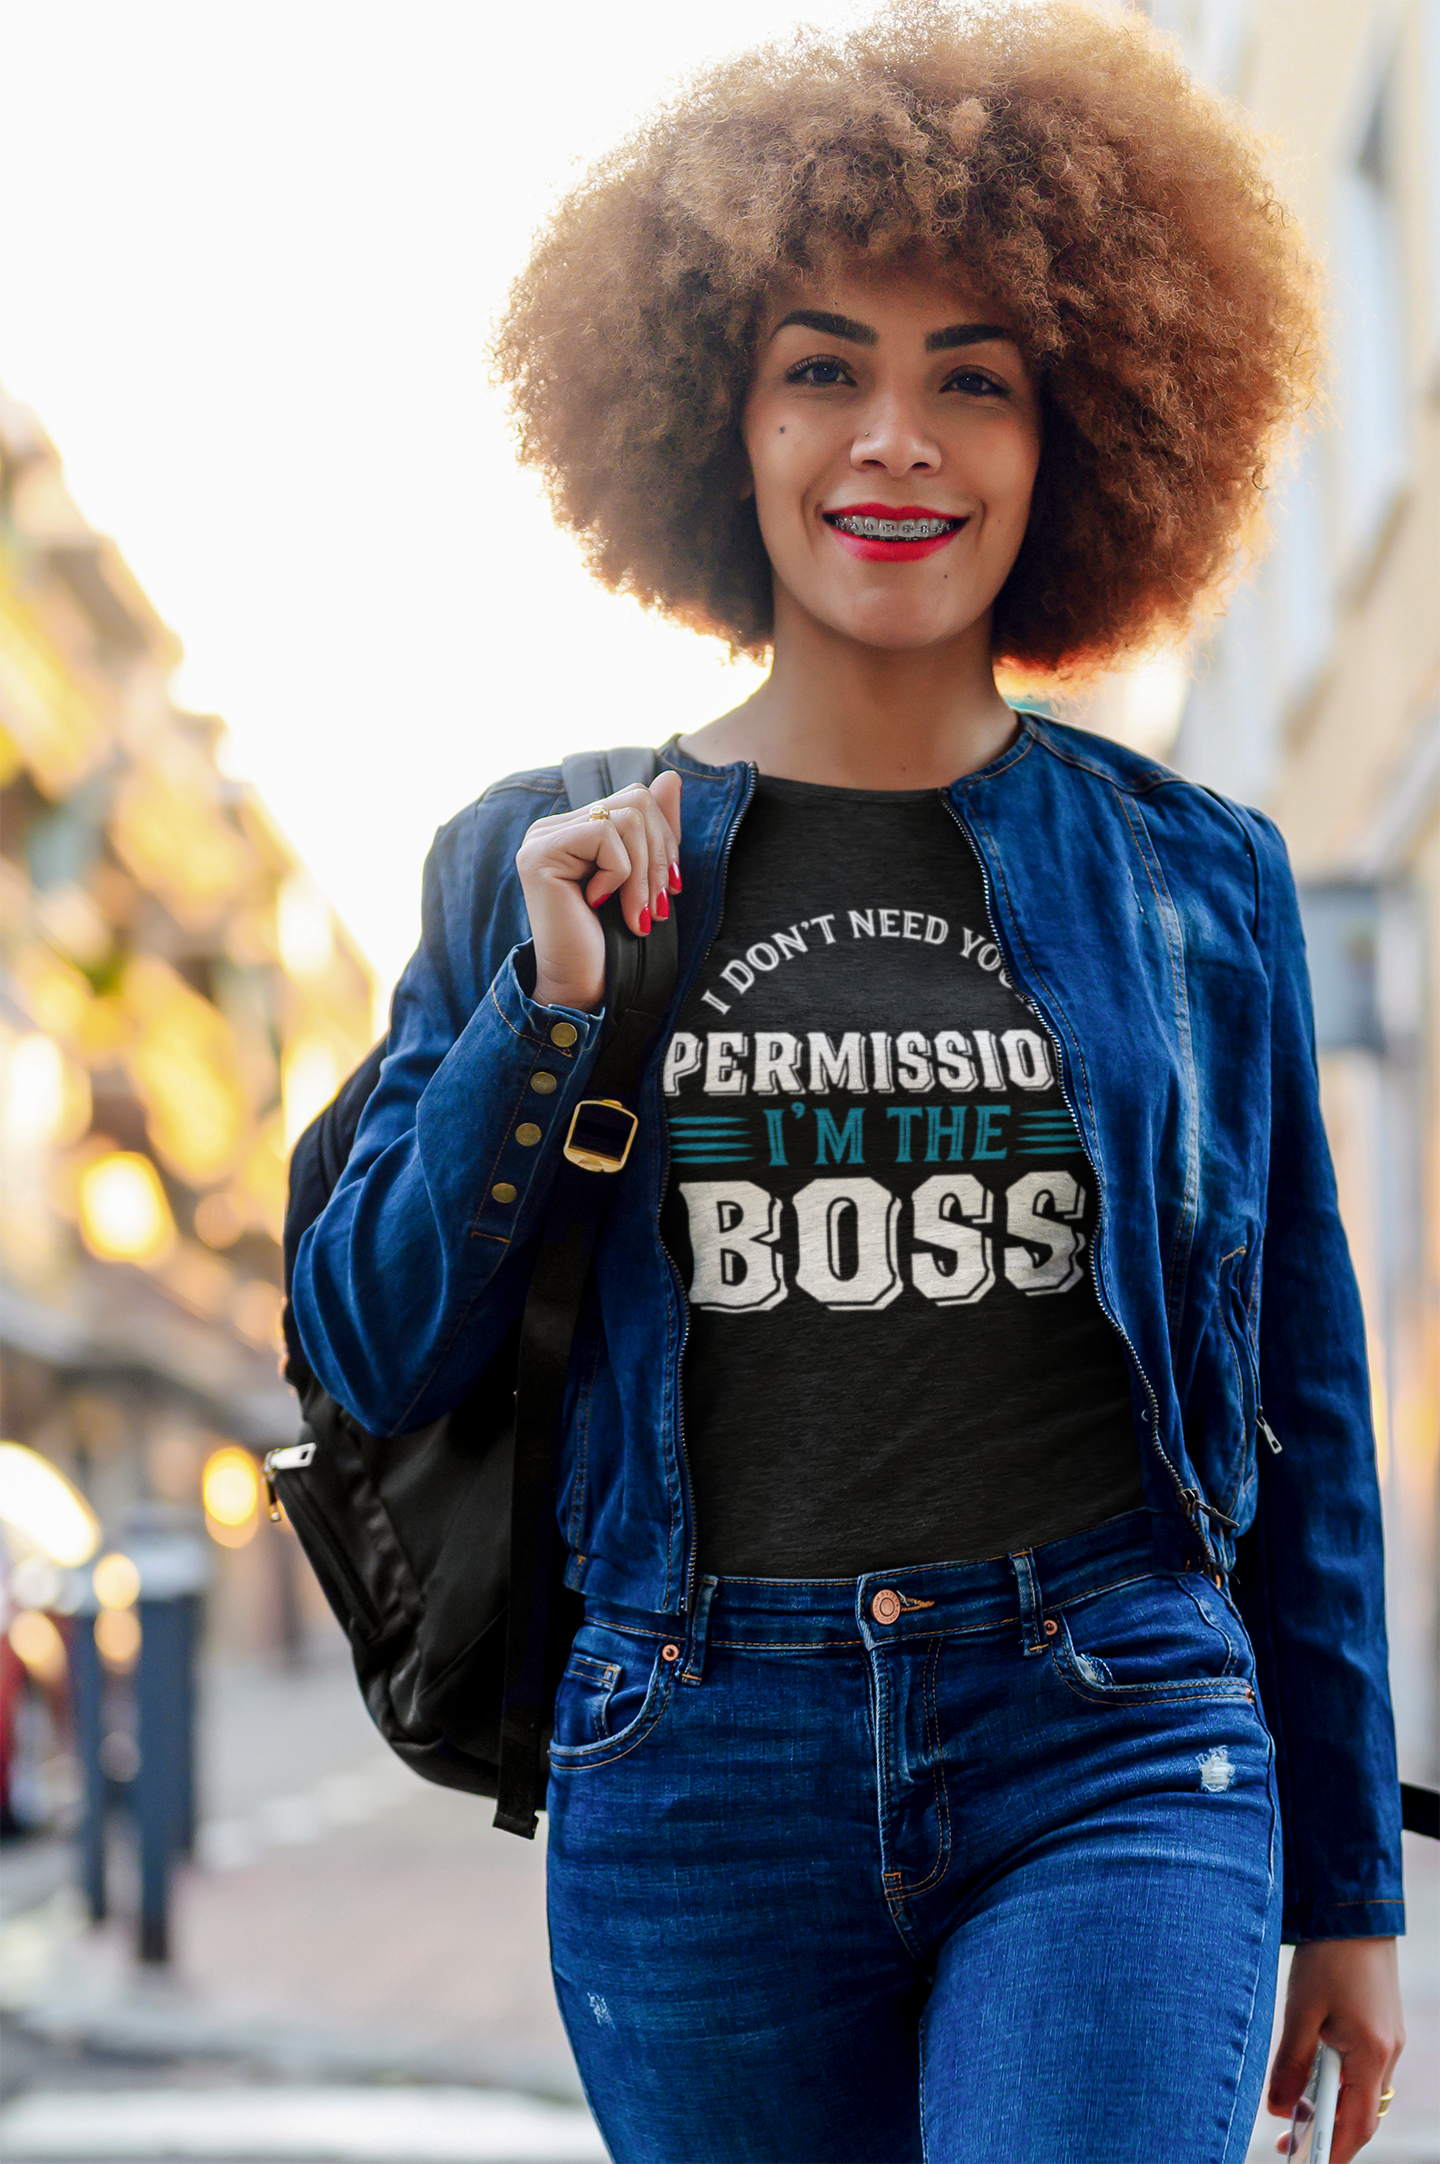 A woman wearing jeans and a I Don't Need Permission Tee by Sharp Tact Kreativ | Tees & Gifts with Encouraging Messages to Brighten Your Day with a Bit of Wit t - shirt that says i'm the boss.